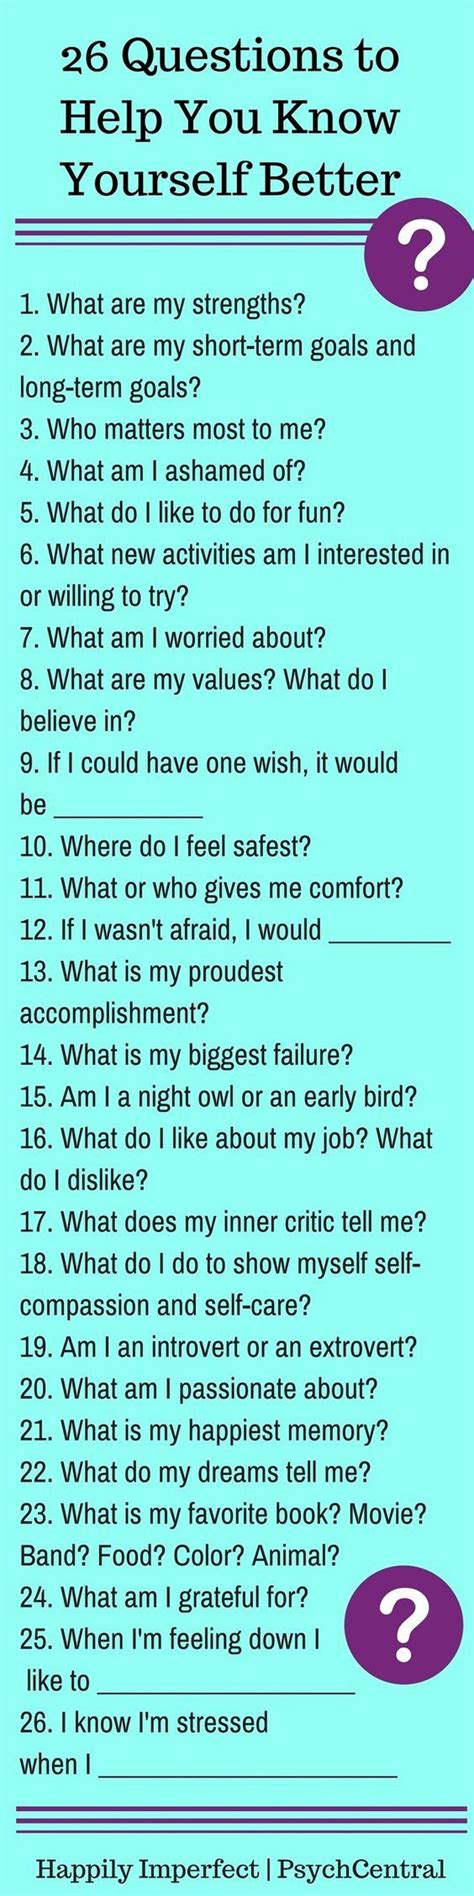 26 Questions To Help You Know Yourself Better Self Help Self